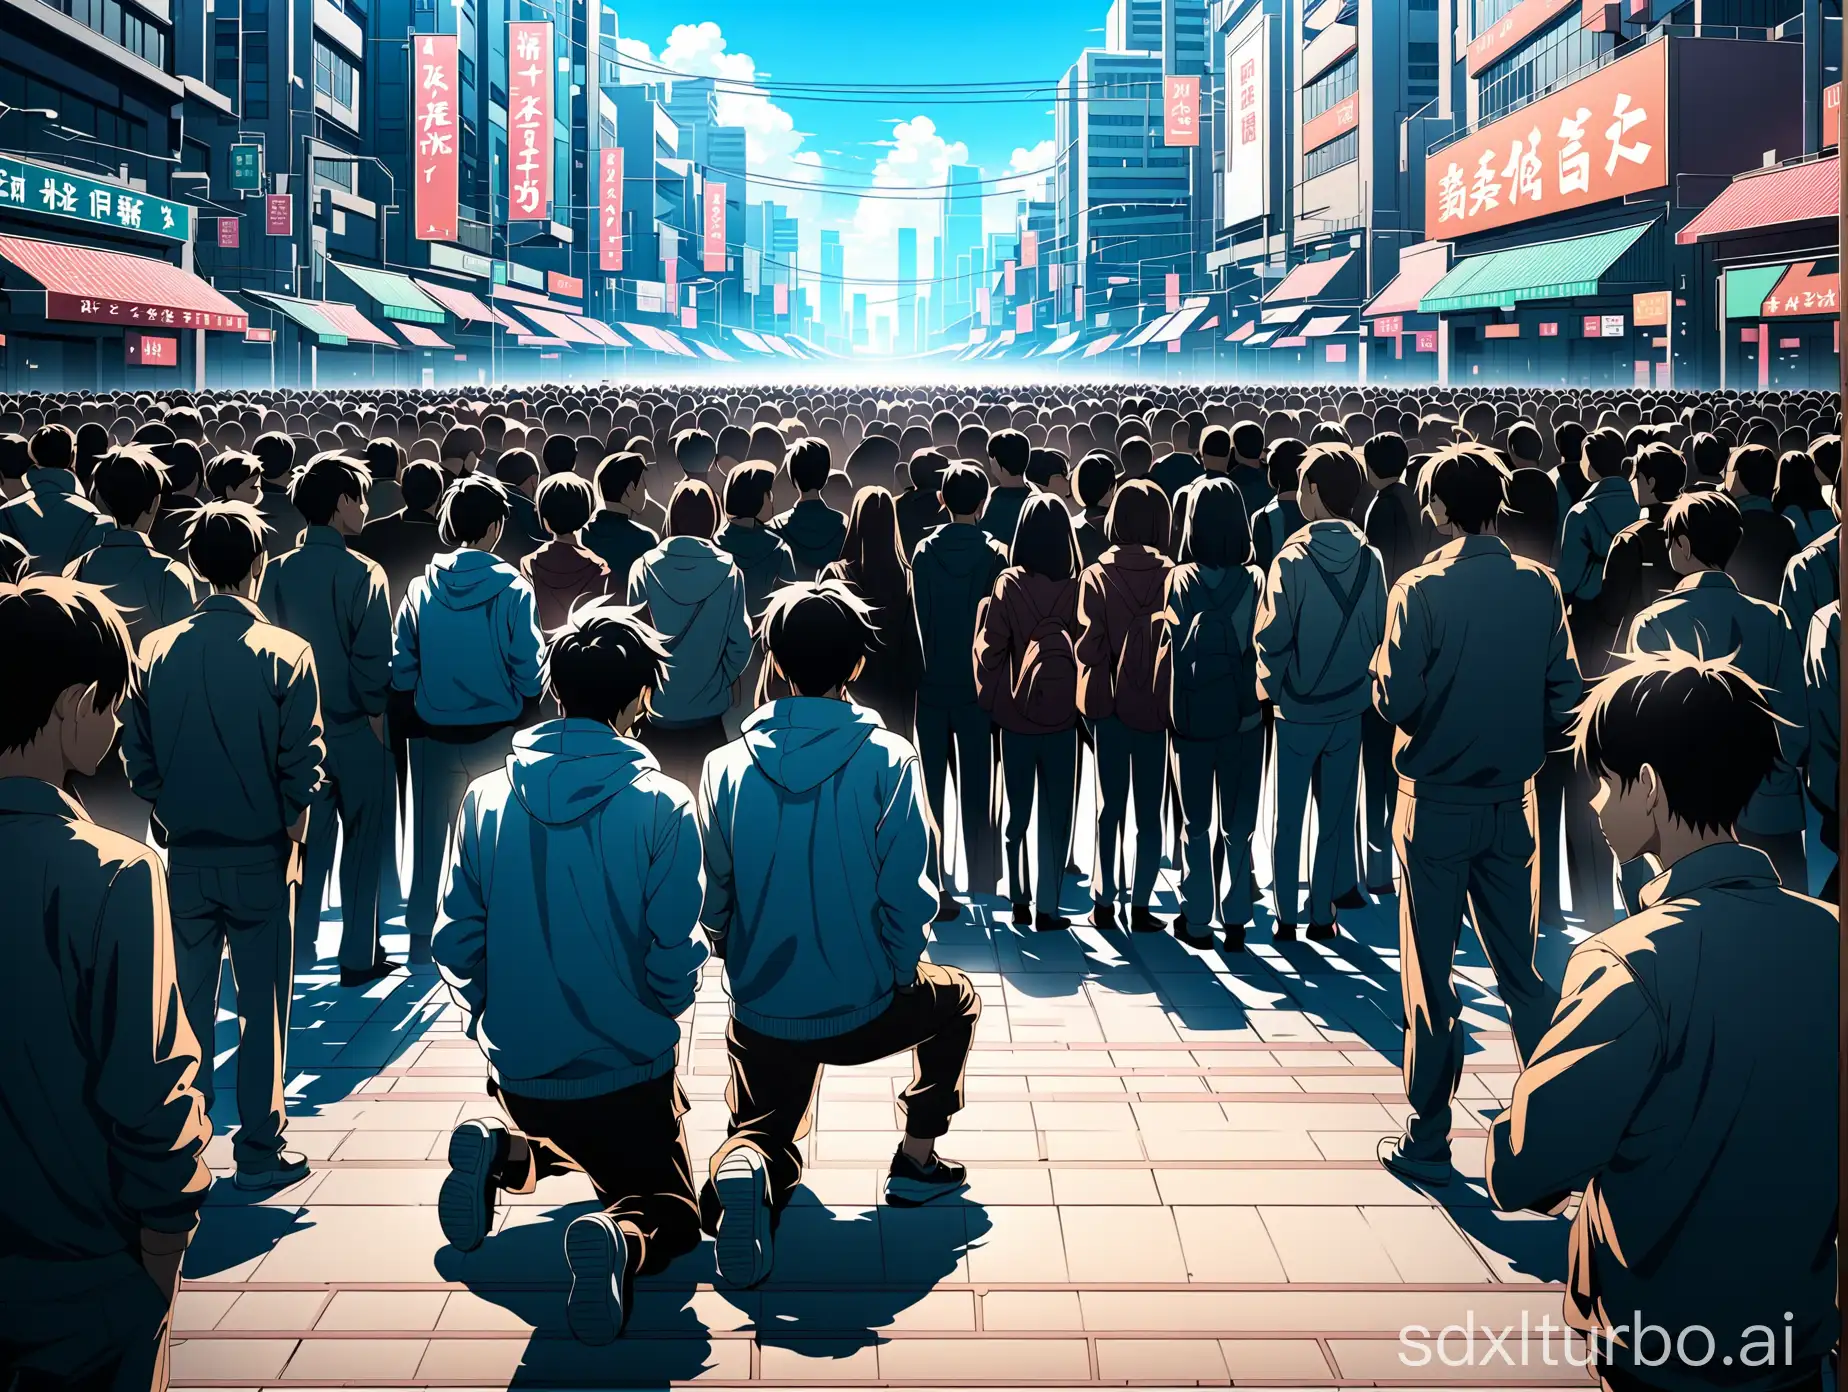 Anime style, crowd kneeling on the modern urban streets, high-definition picture quality, 4K, original